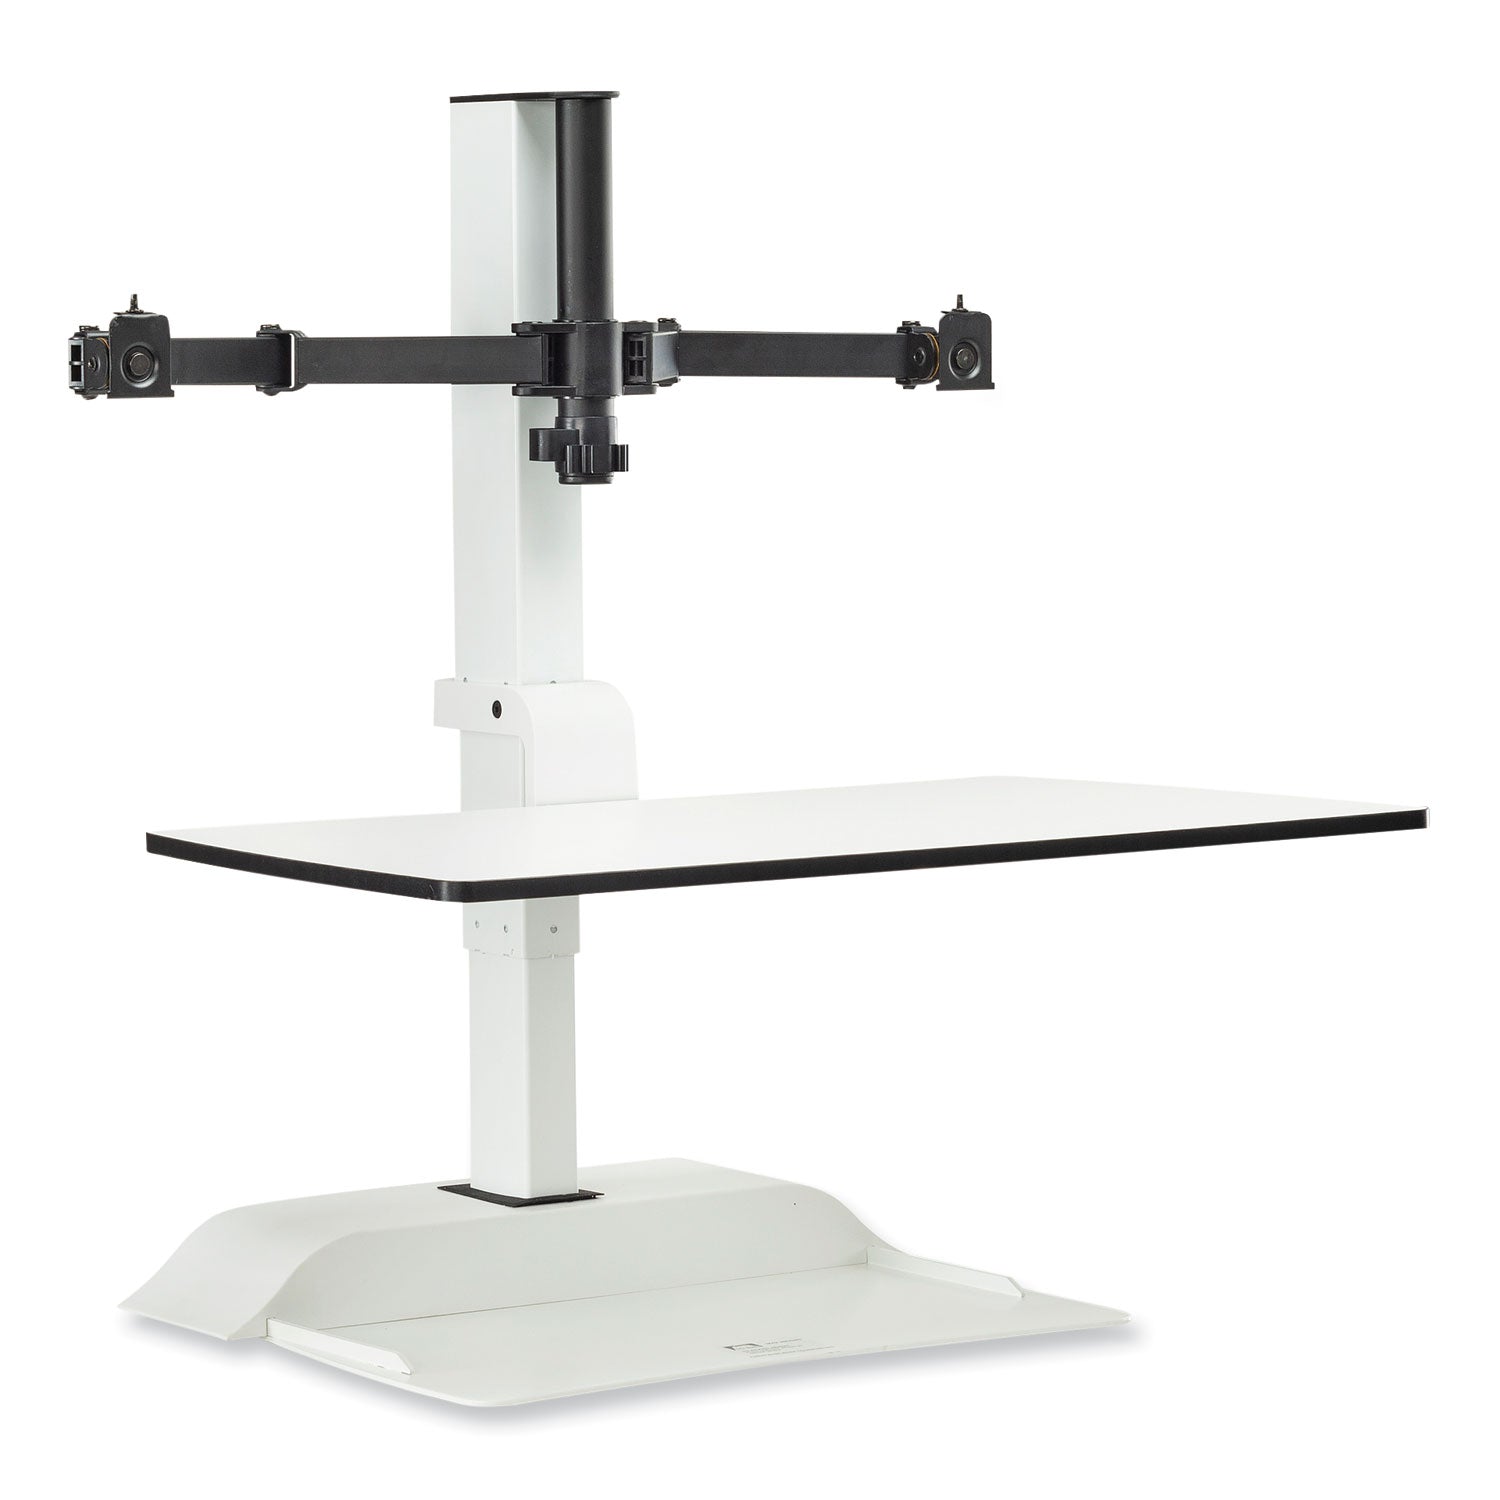 soar-electric-desktop-sit-stand-dual-monitor-arm-for-27-monitors-white-supports-10-lbs-ships-in-1-3-business-days_saf2193wh - 1